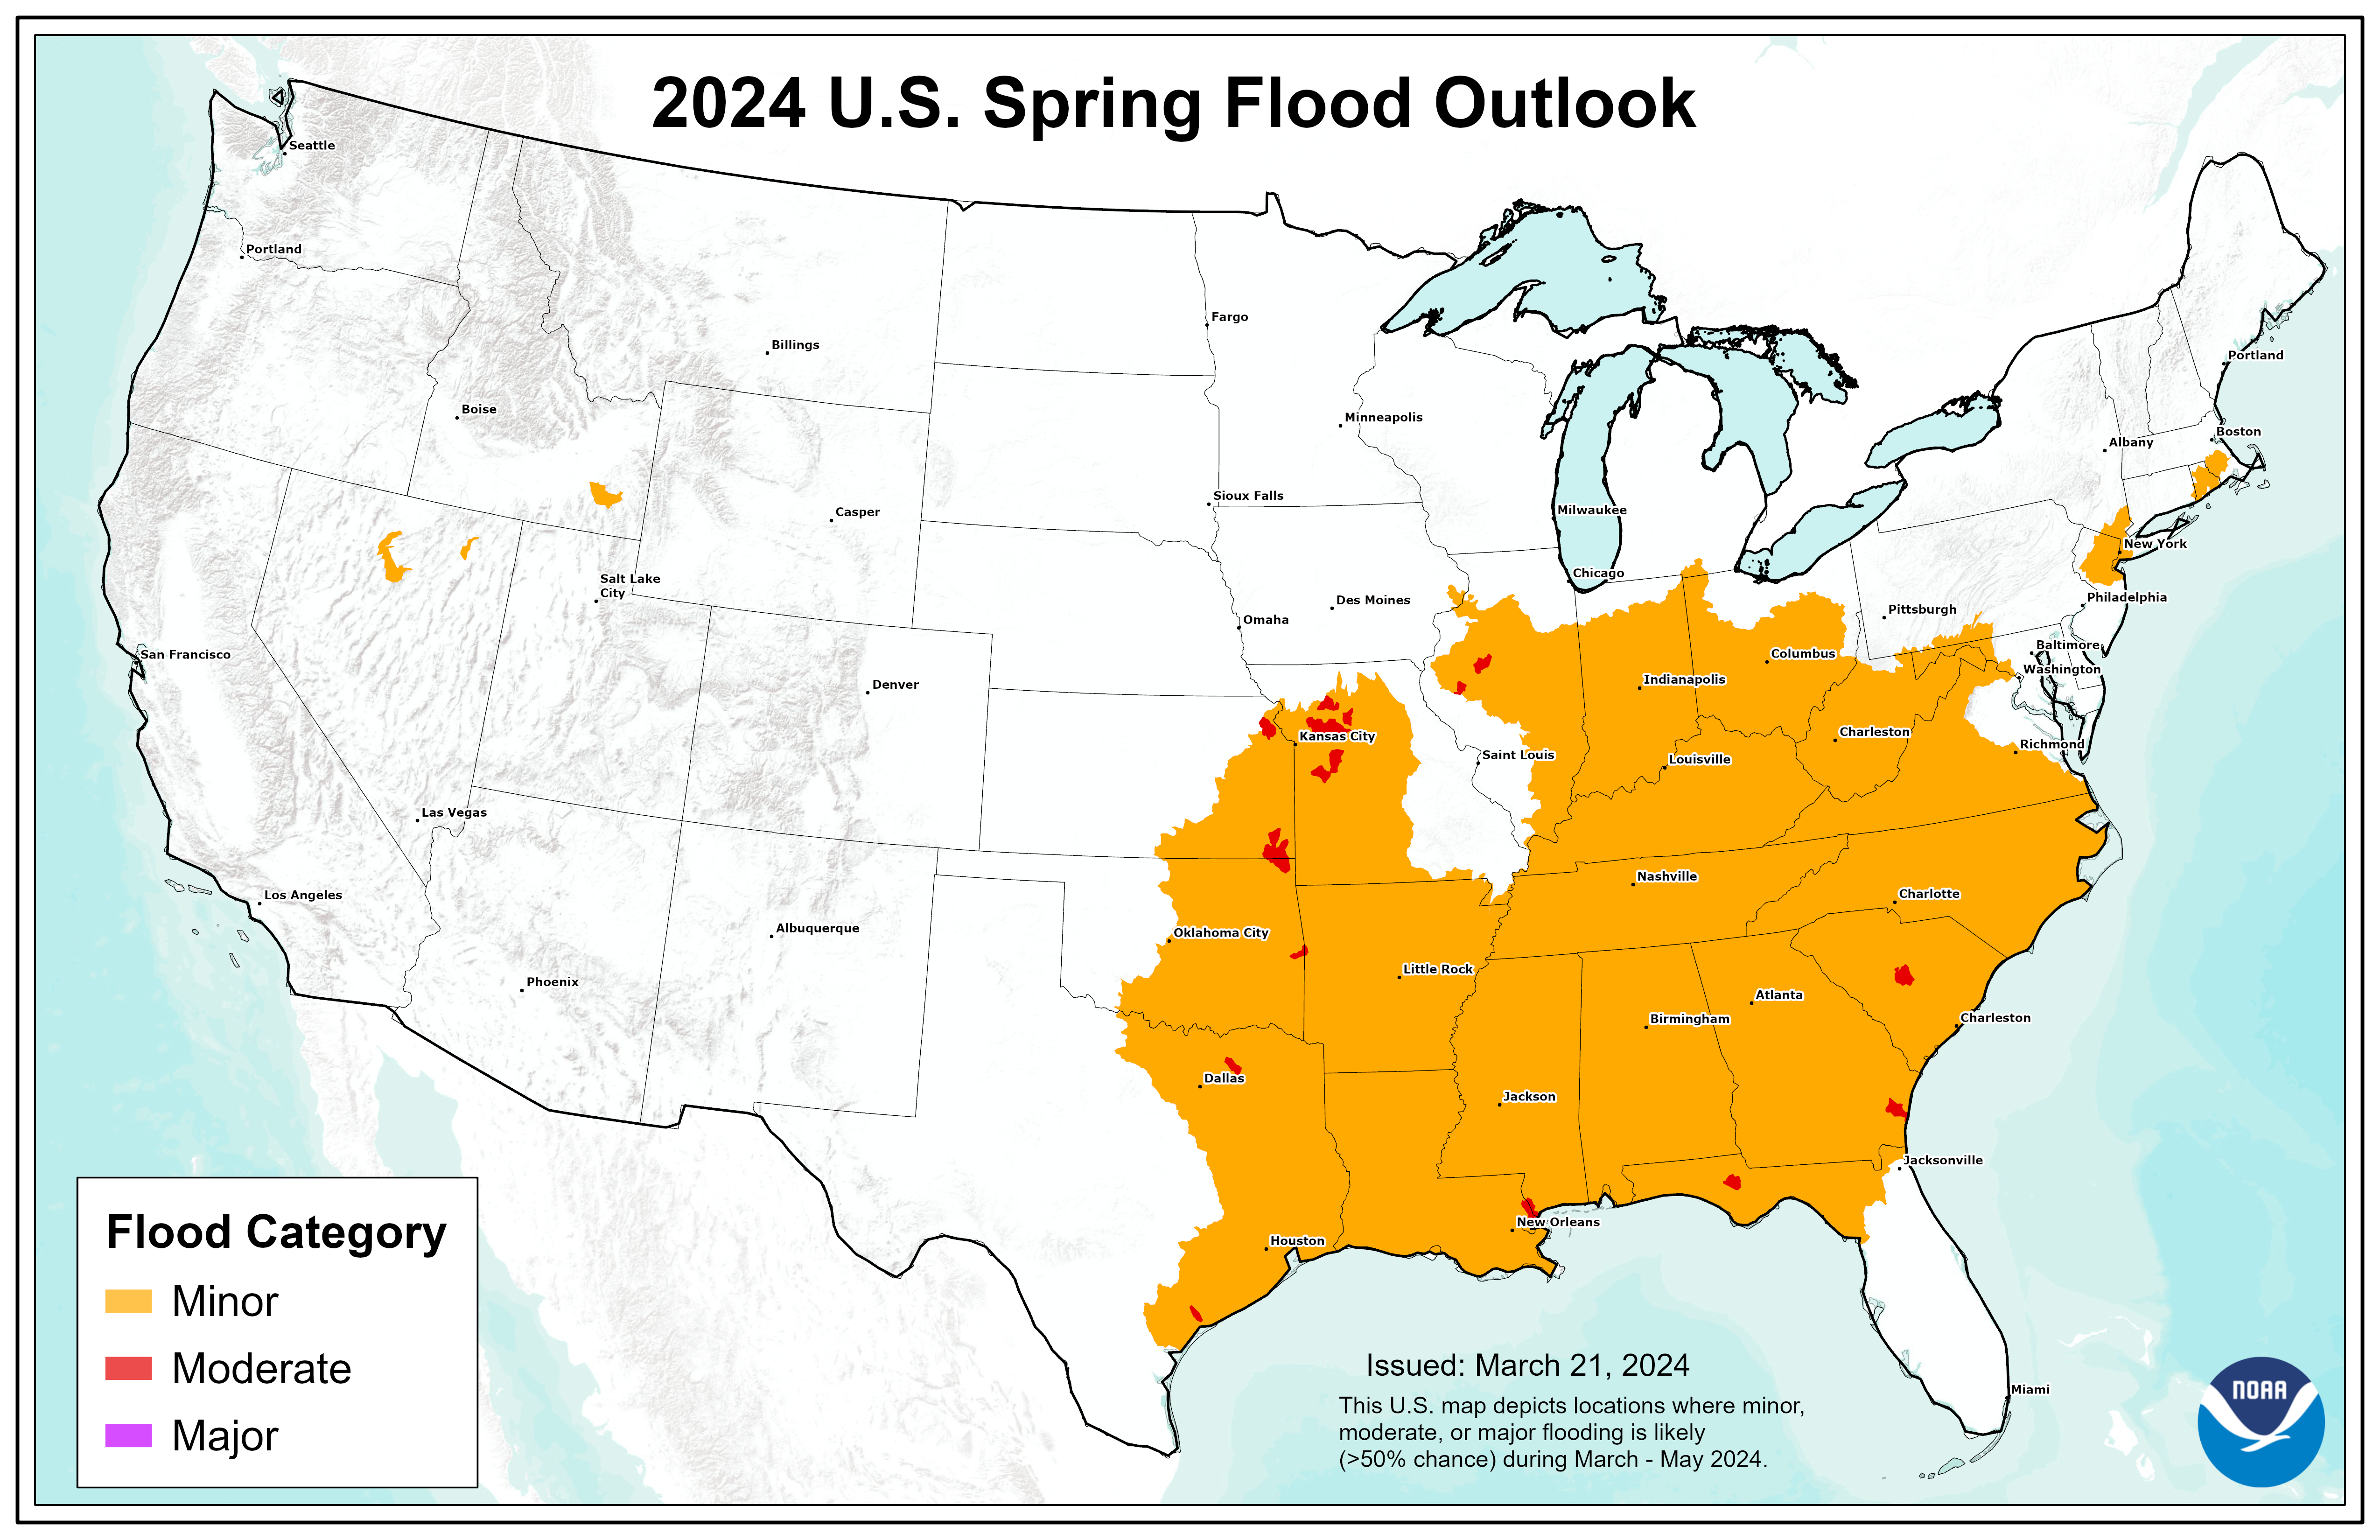 This map depicts the locations where there is a greater than 50% chance of minor to major flooding during April through June, 2024. 